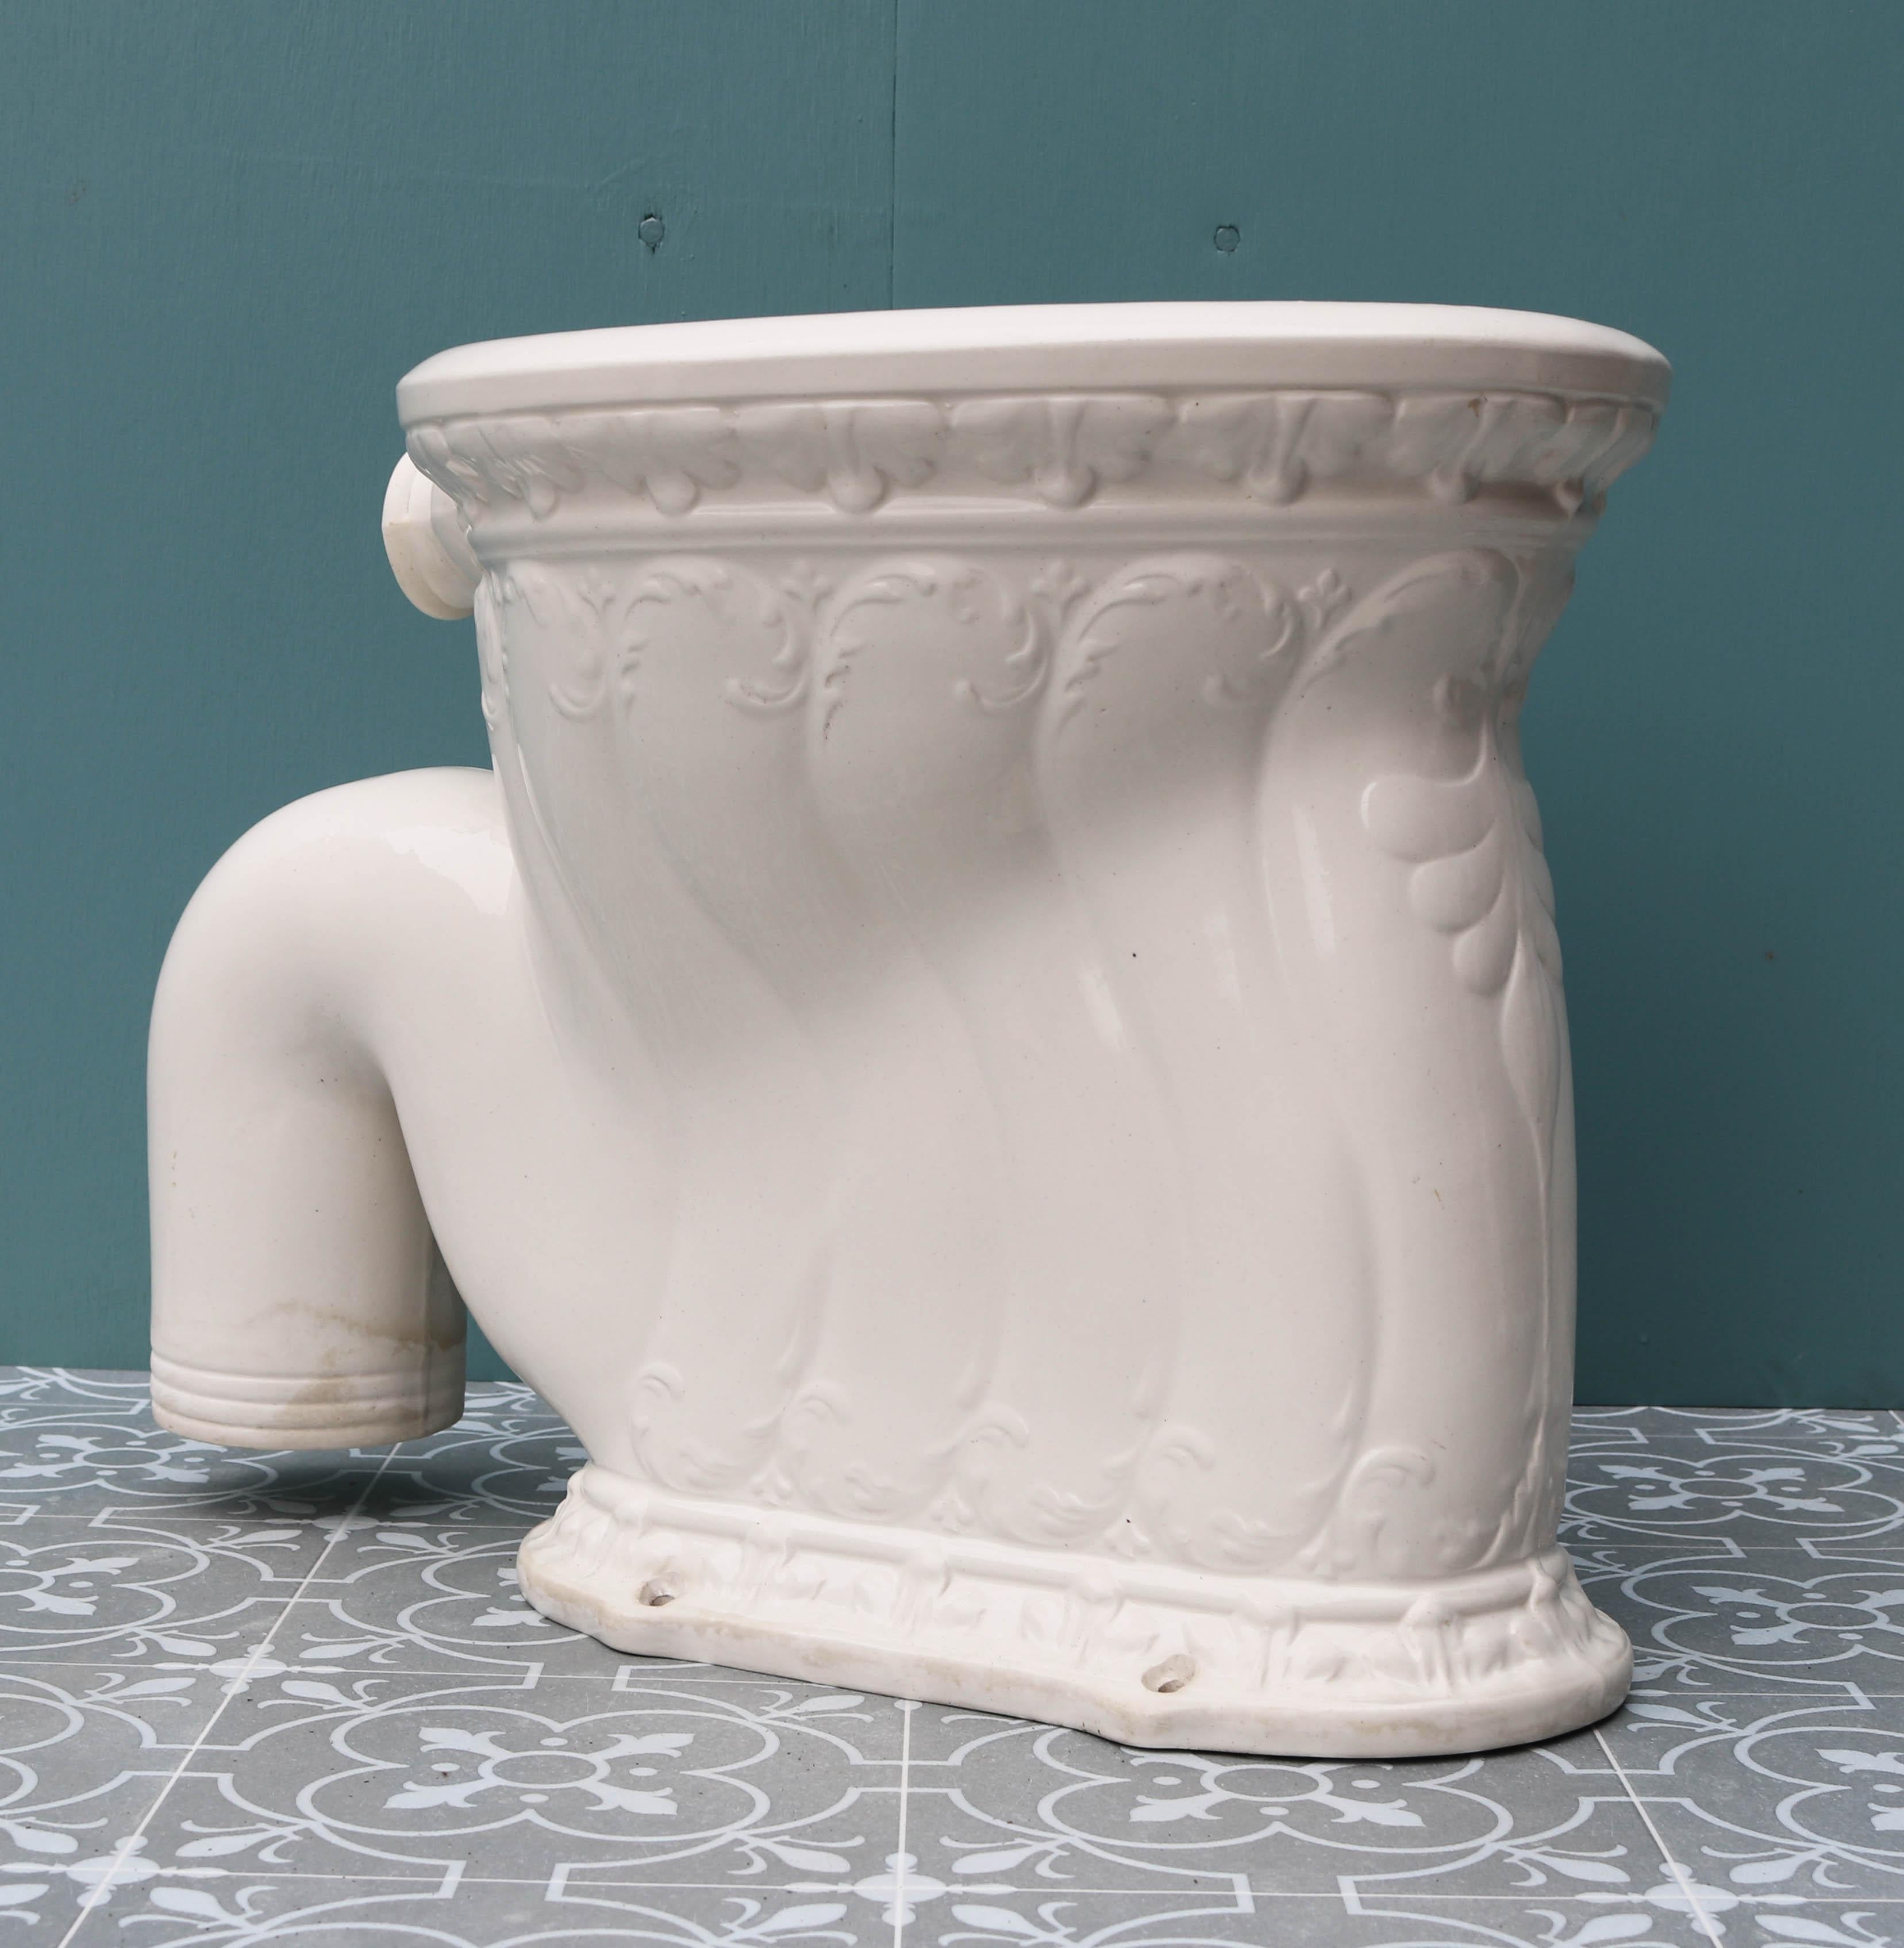 A Victorian period ‘Shower’ toilet pan. White glaze with an embossed pattern. ‘S’ trap.